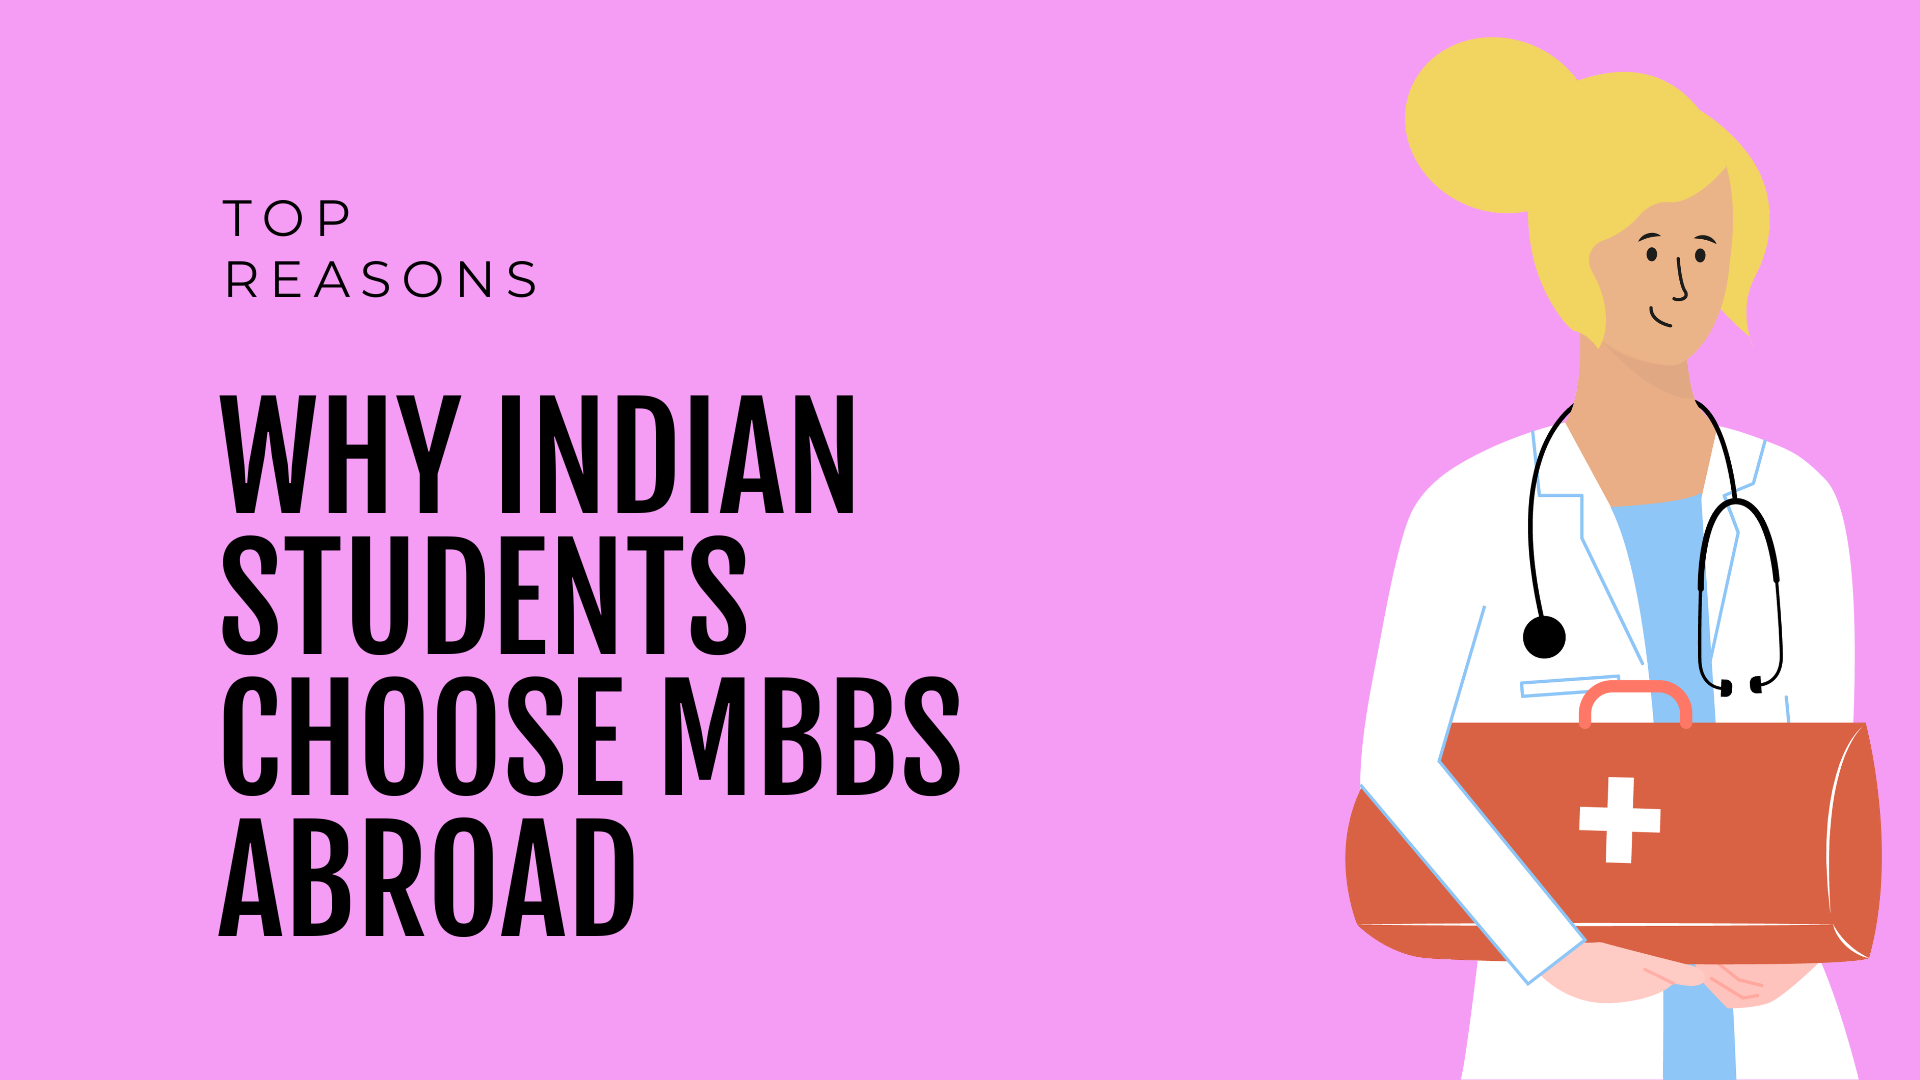 Top Reasons To Study MBBS Abroad